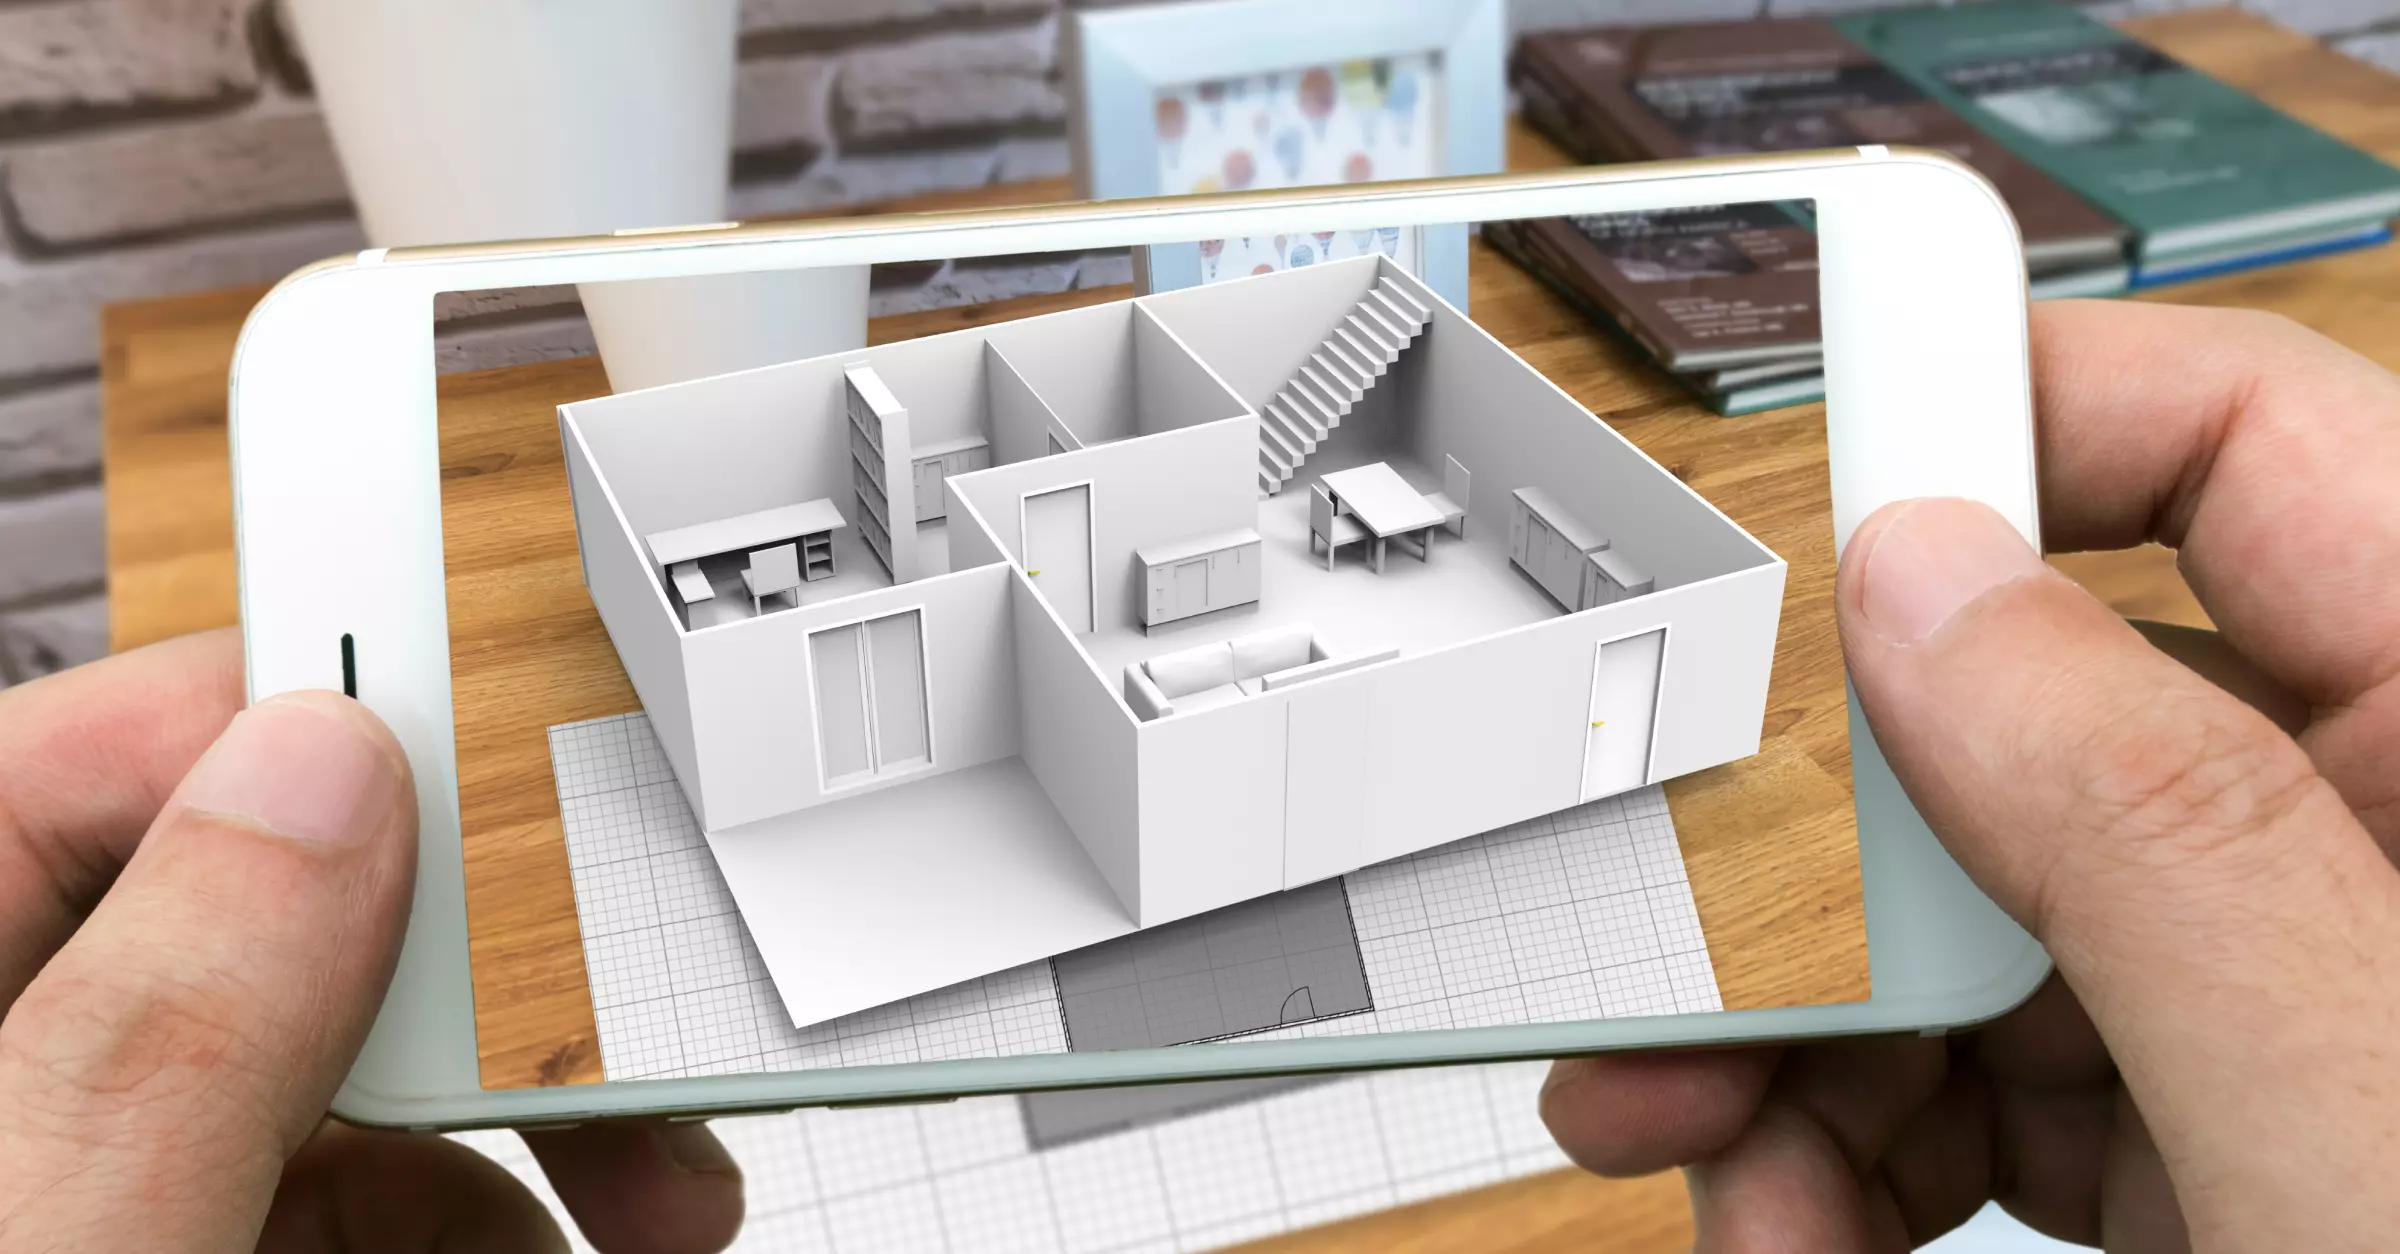 Design Features in Augmented Reality (AR)